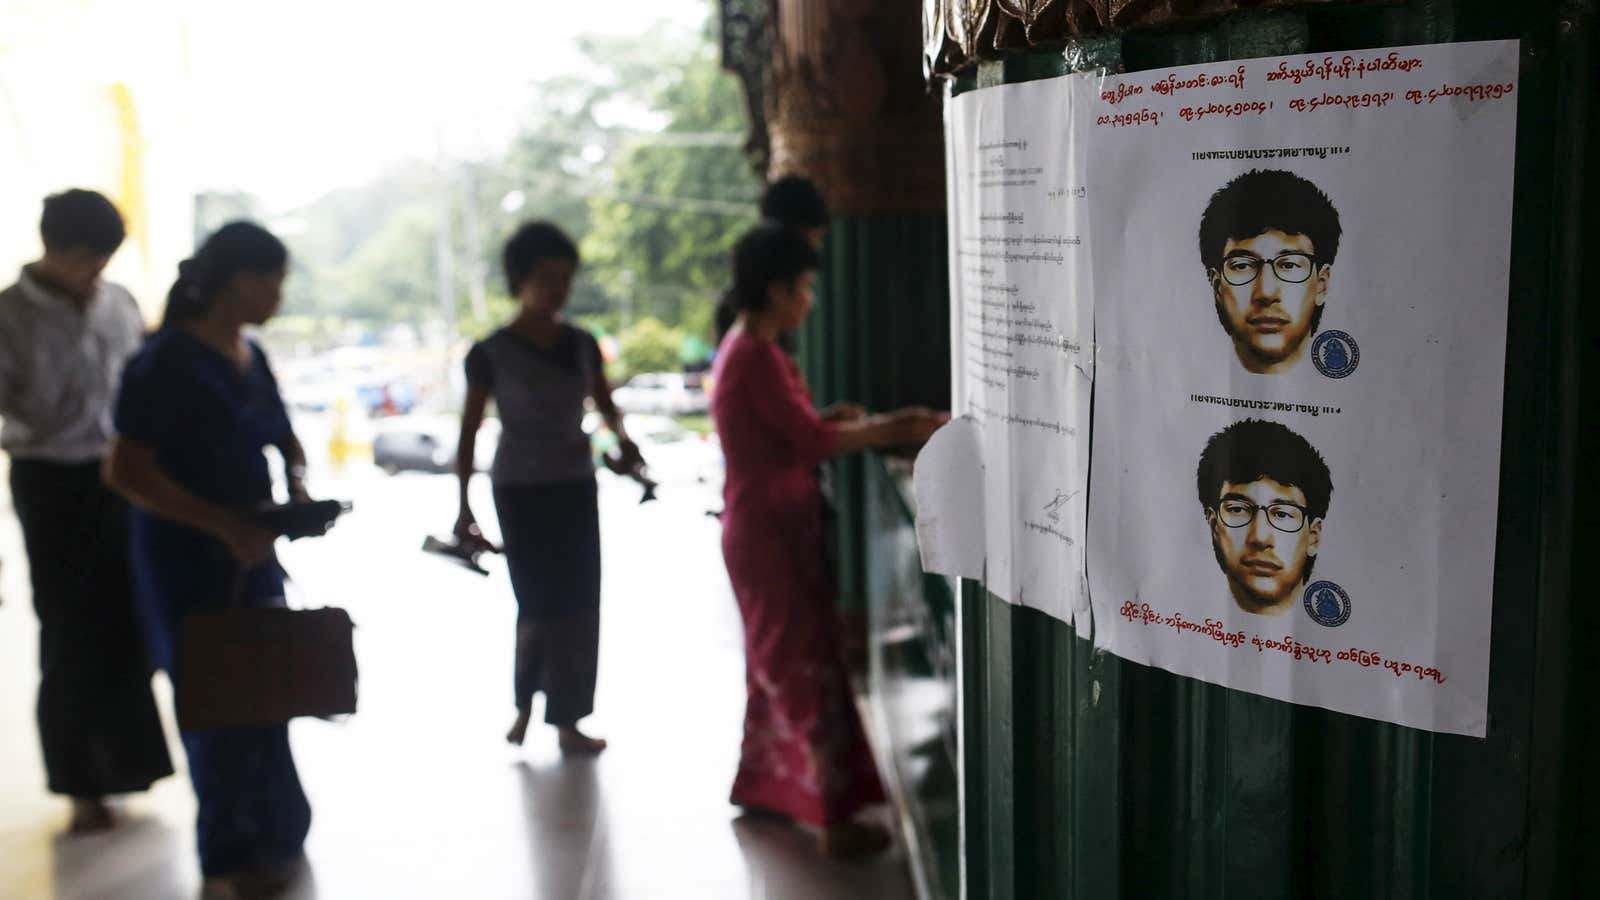 Sketches of a suspect affiliated with the bombing posted in Myanmar.